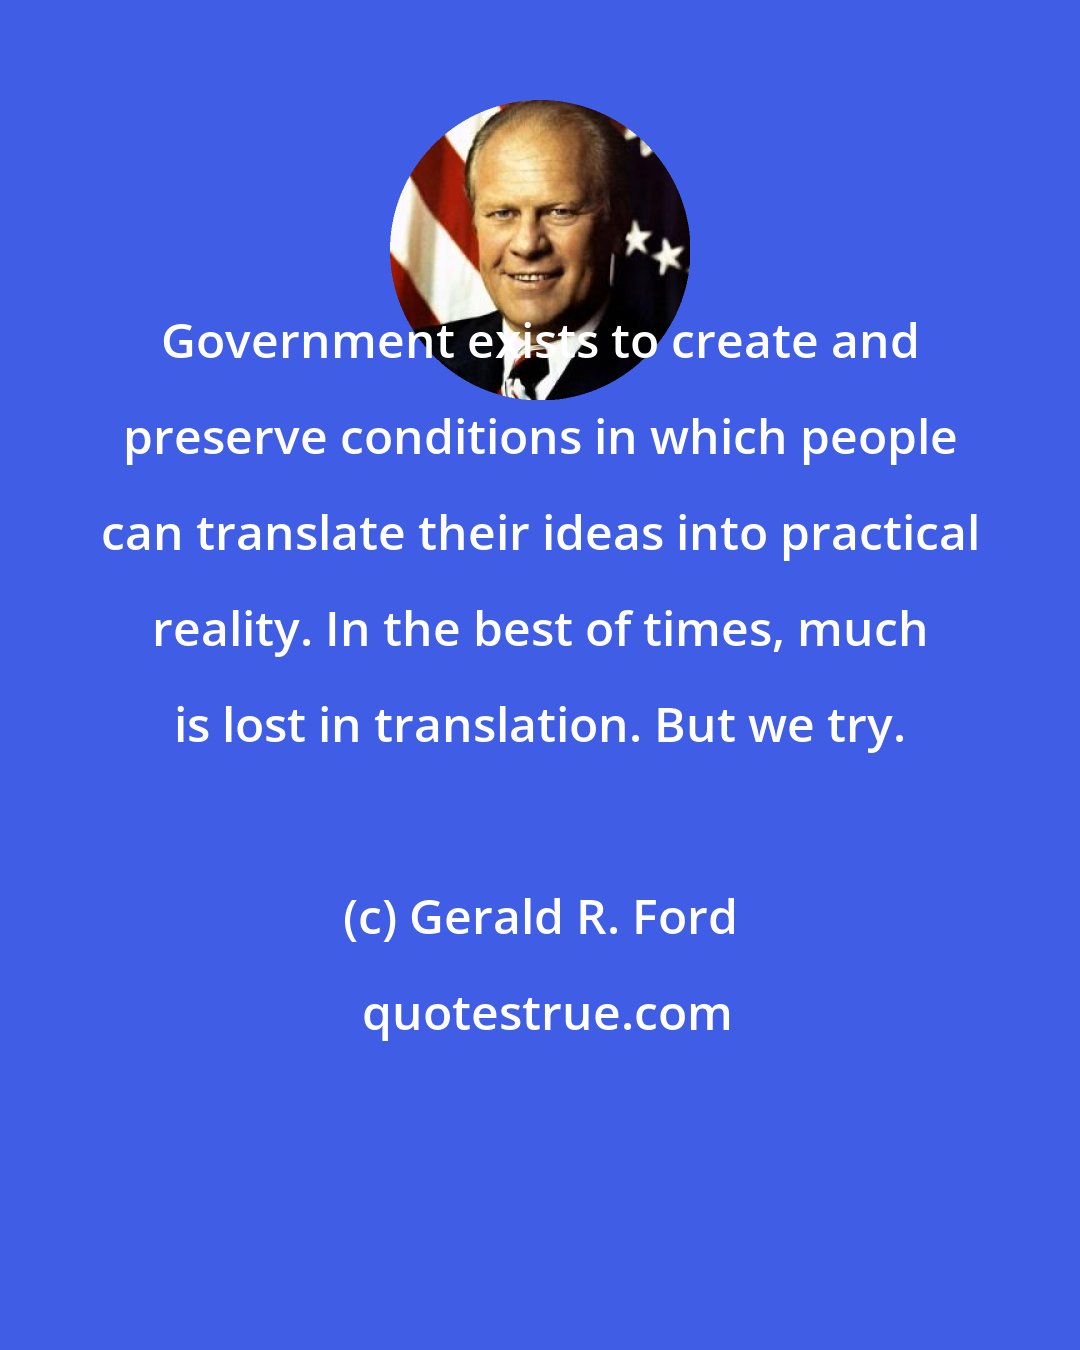 Gerald R. Ford: Government exists to create and preserve conditions in which people can translate their ideas into practical reality. In the best of times, much is lost in translation. But we try.